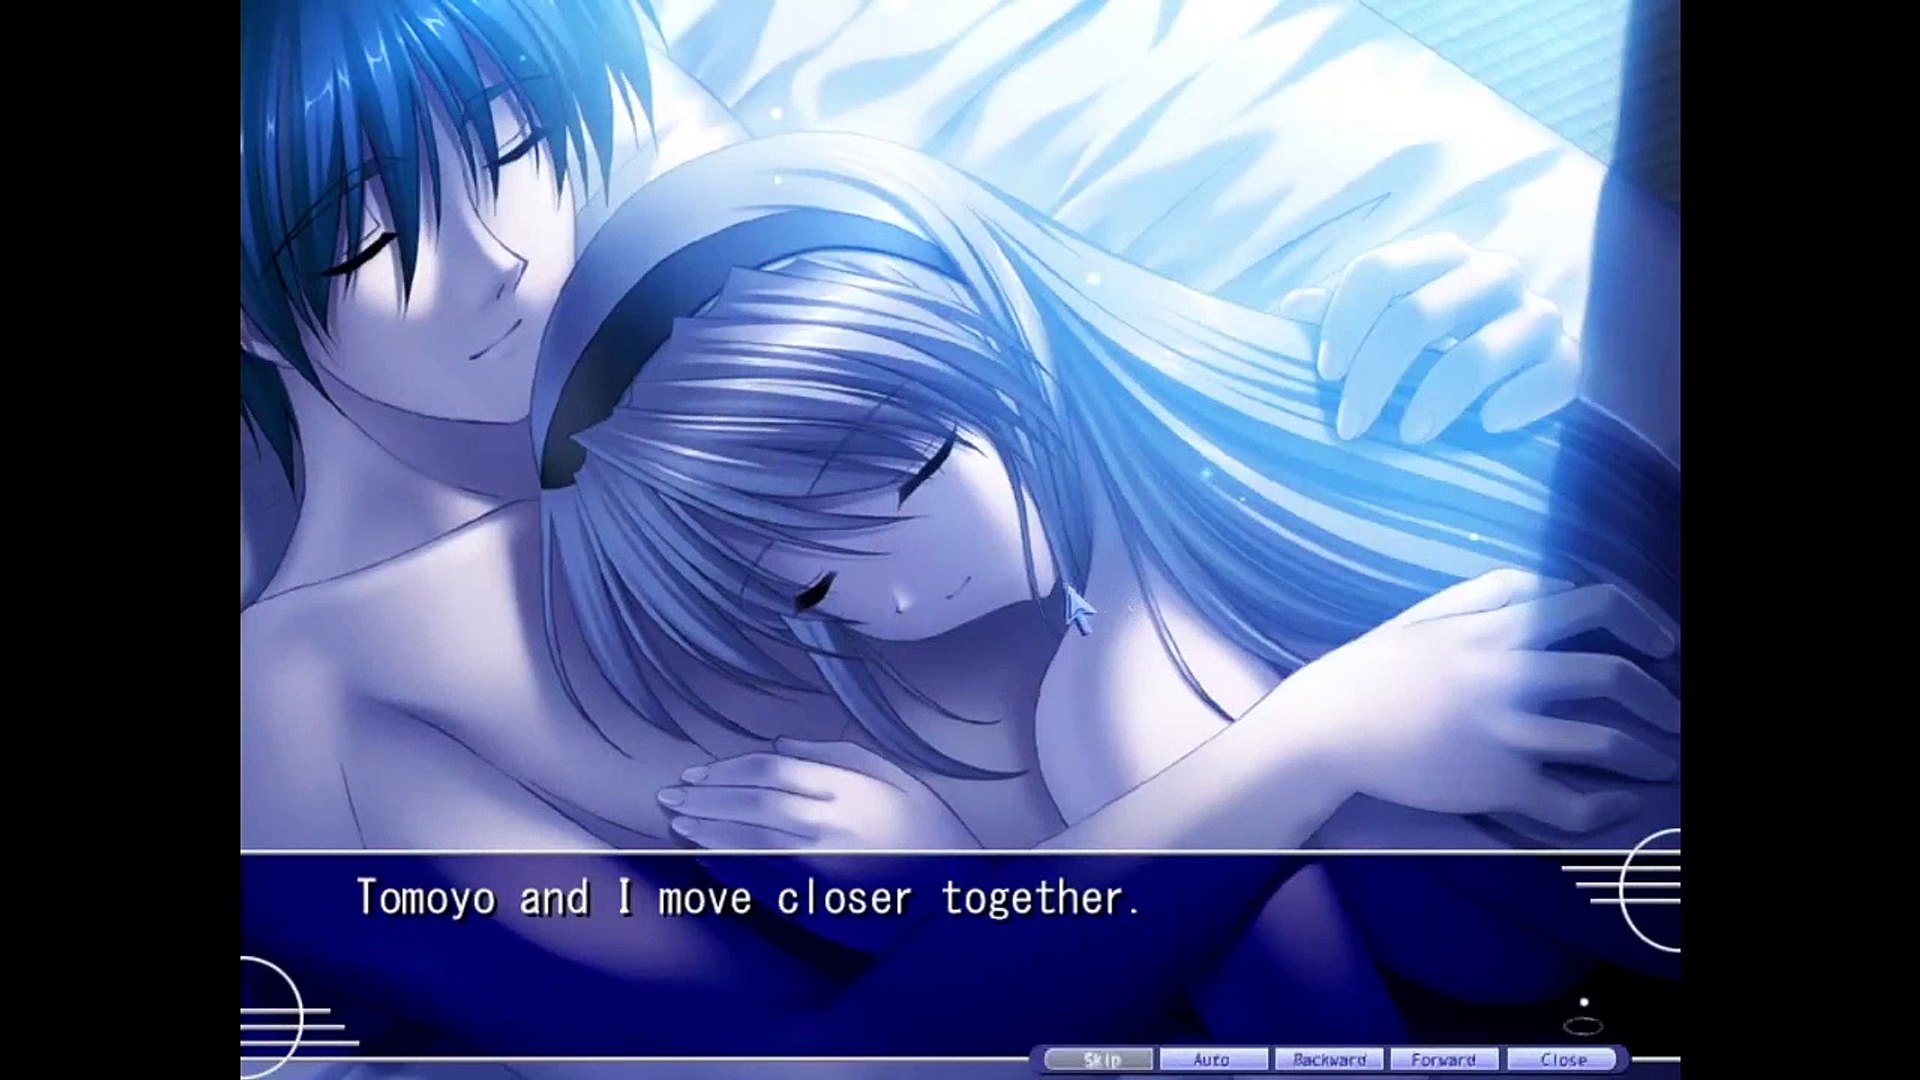 Clannad tomoyo after sex scene